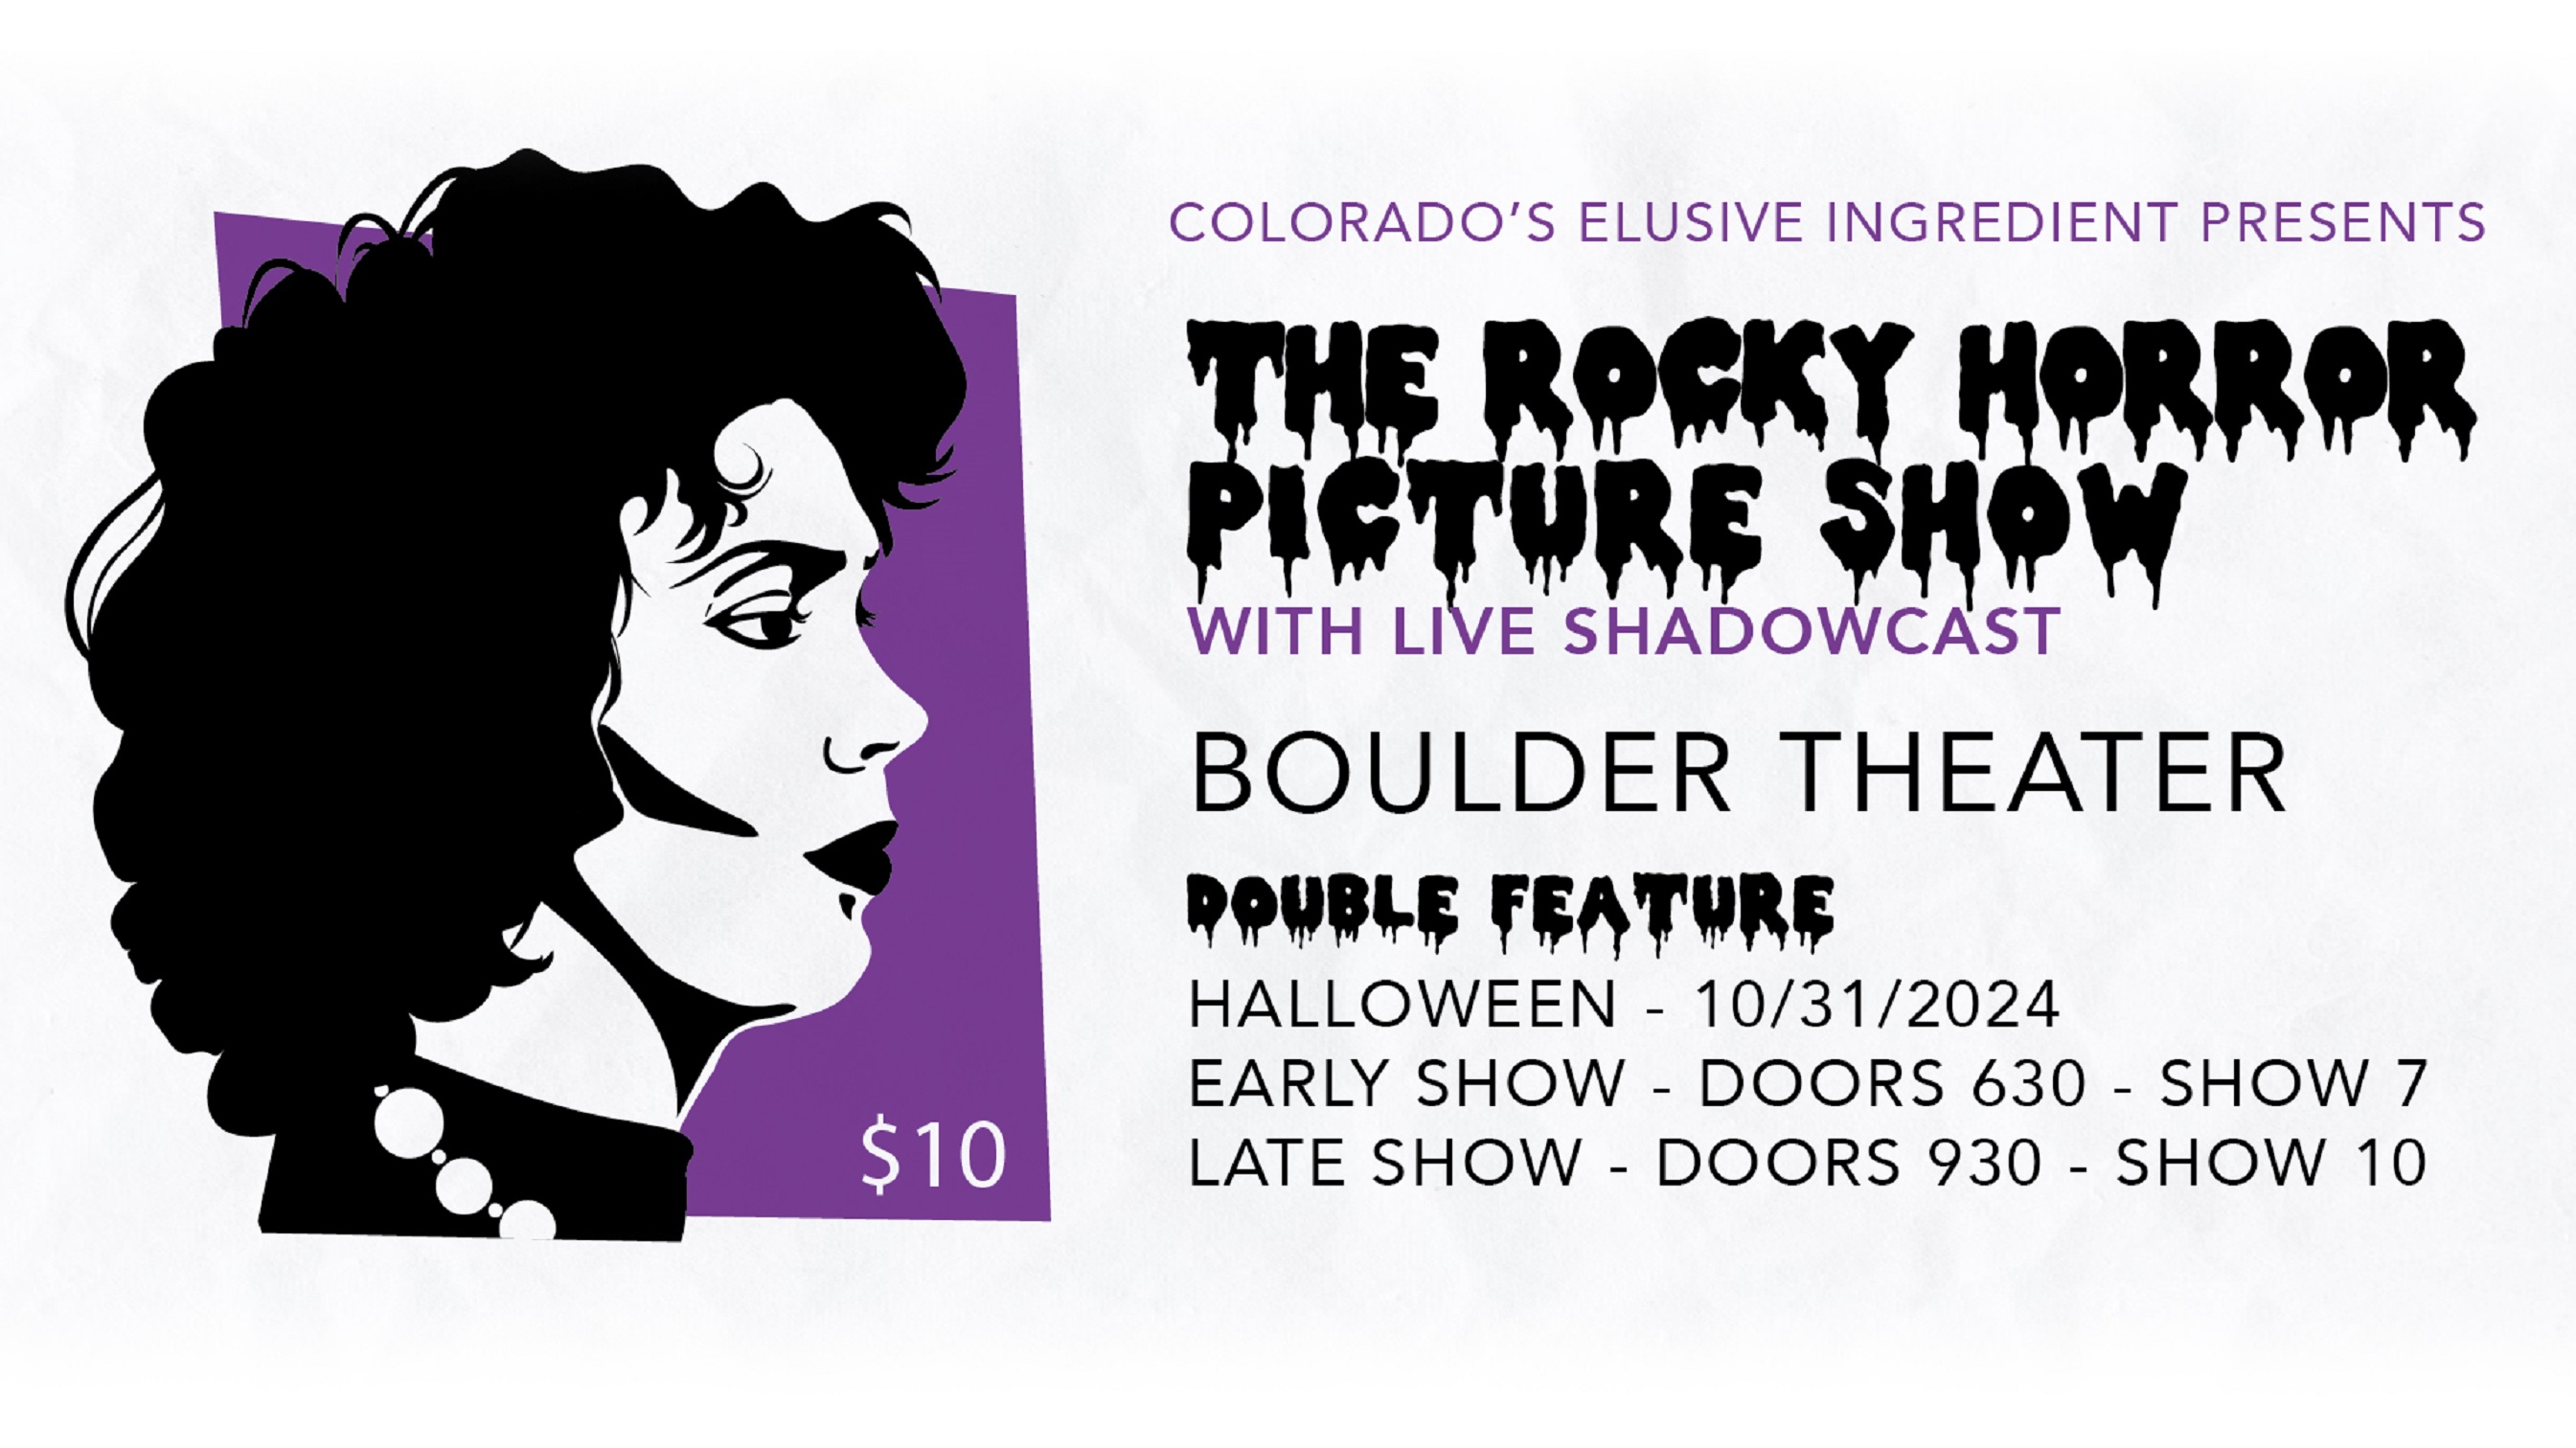 Experience the Rocky Horror Phenomenon with CEI at Boulder Theater